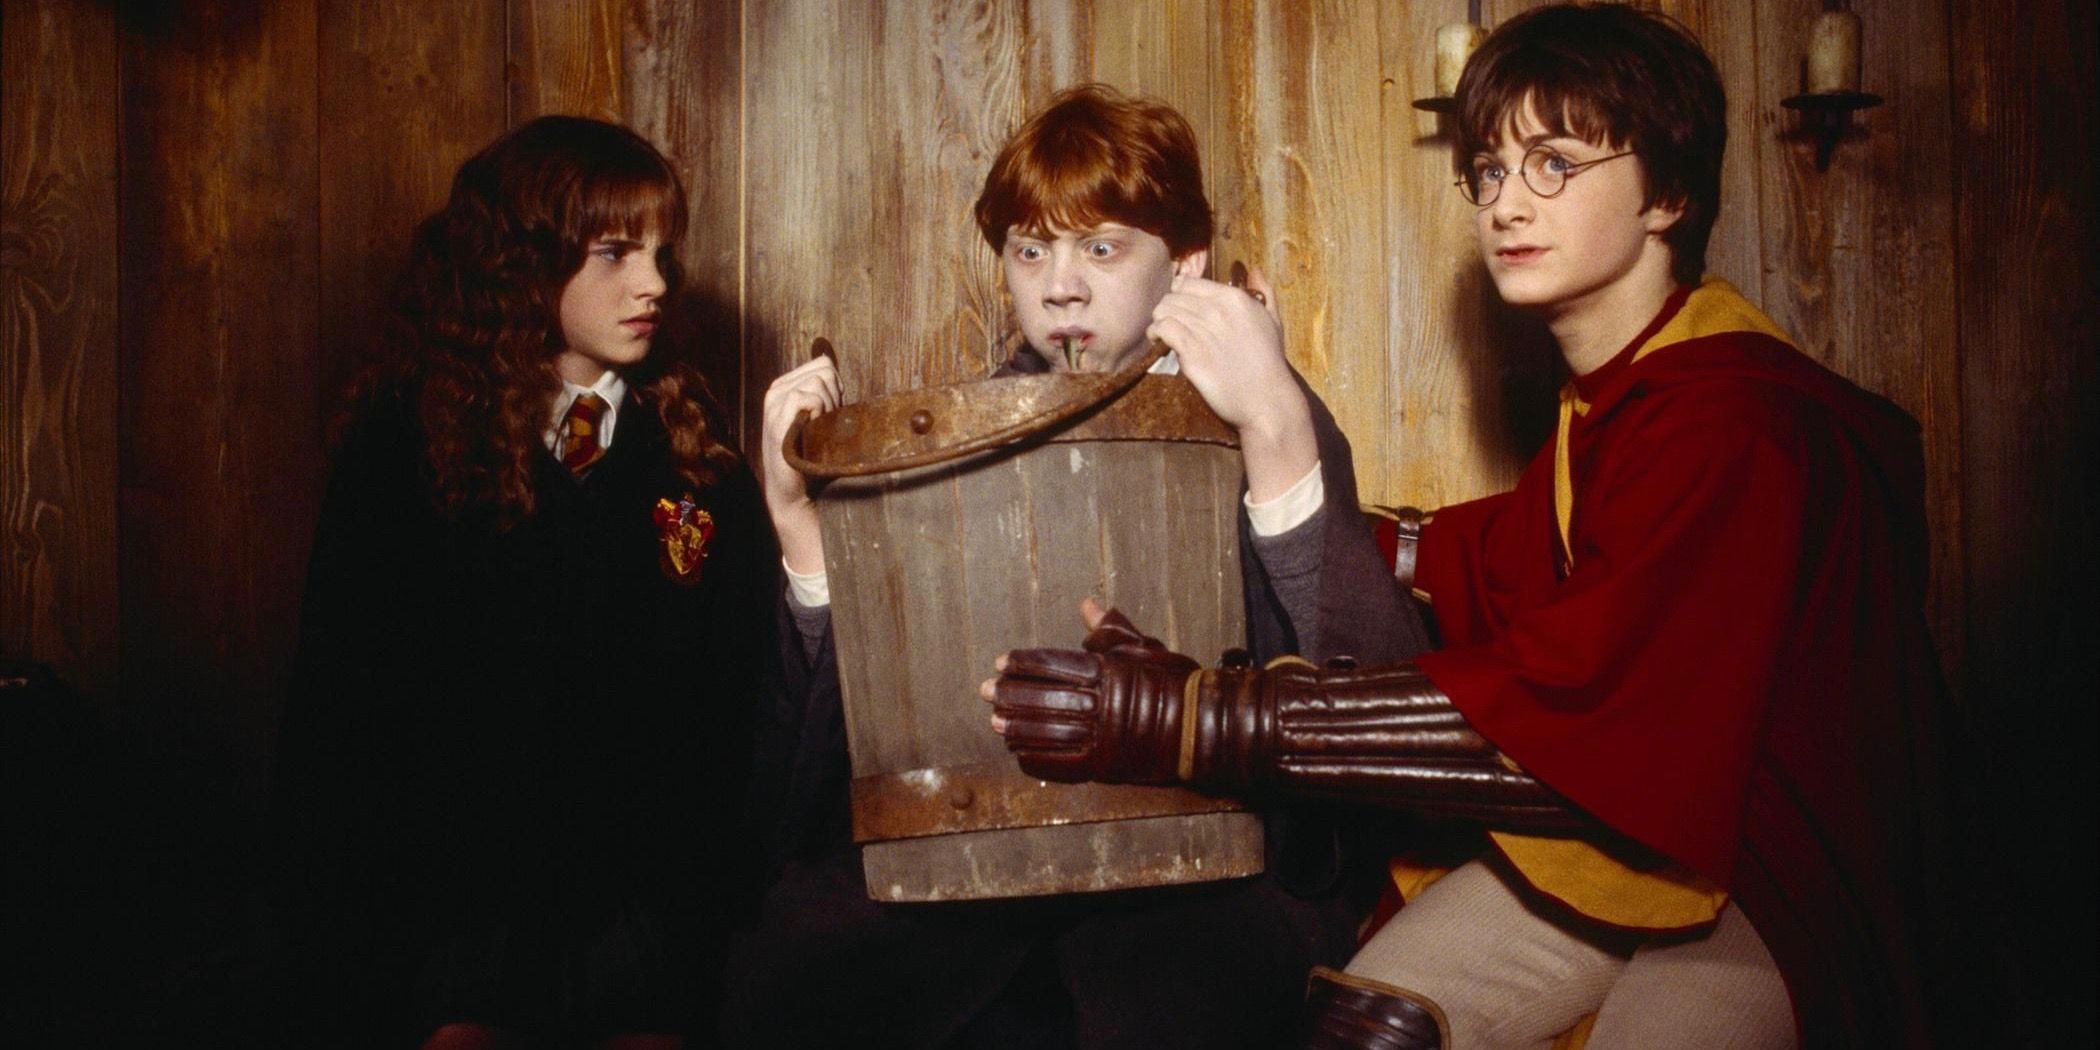 Ron Weasley throwing up slugs with Harry and Hermione taking care of him in Harry Potter.